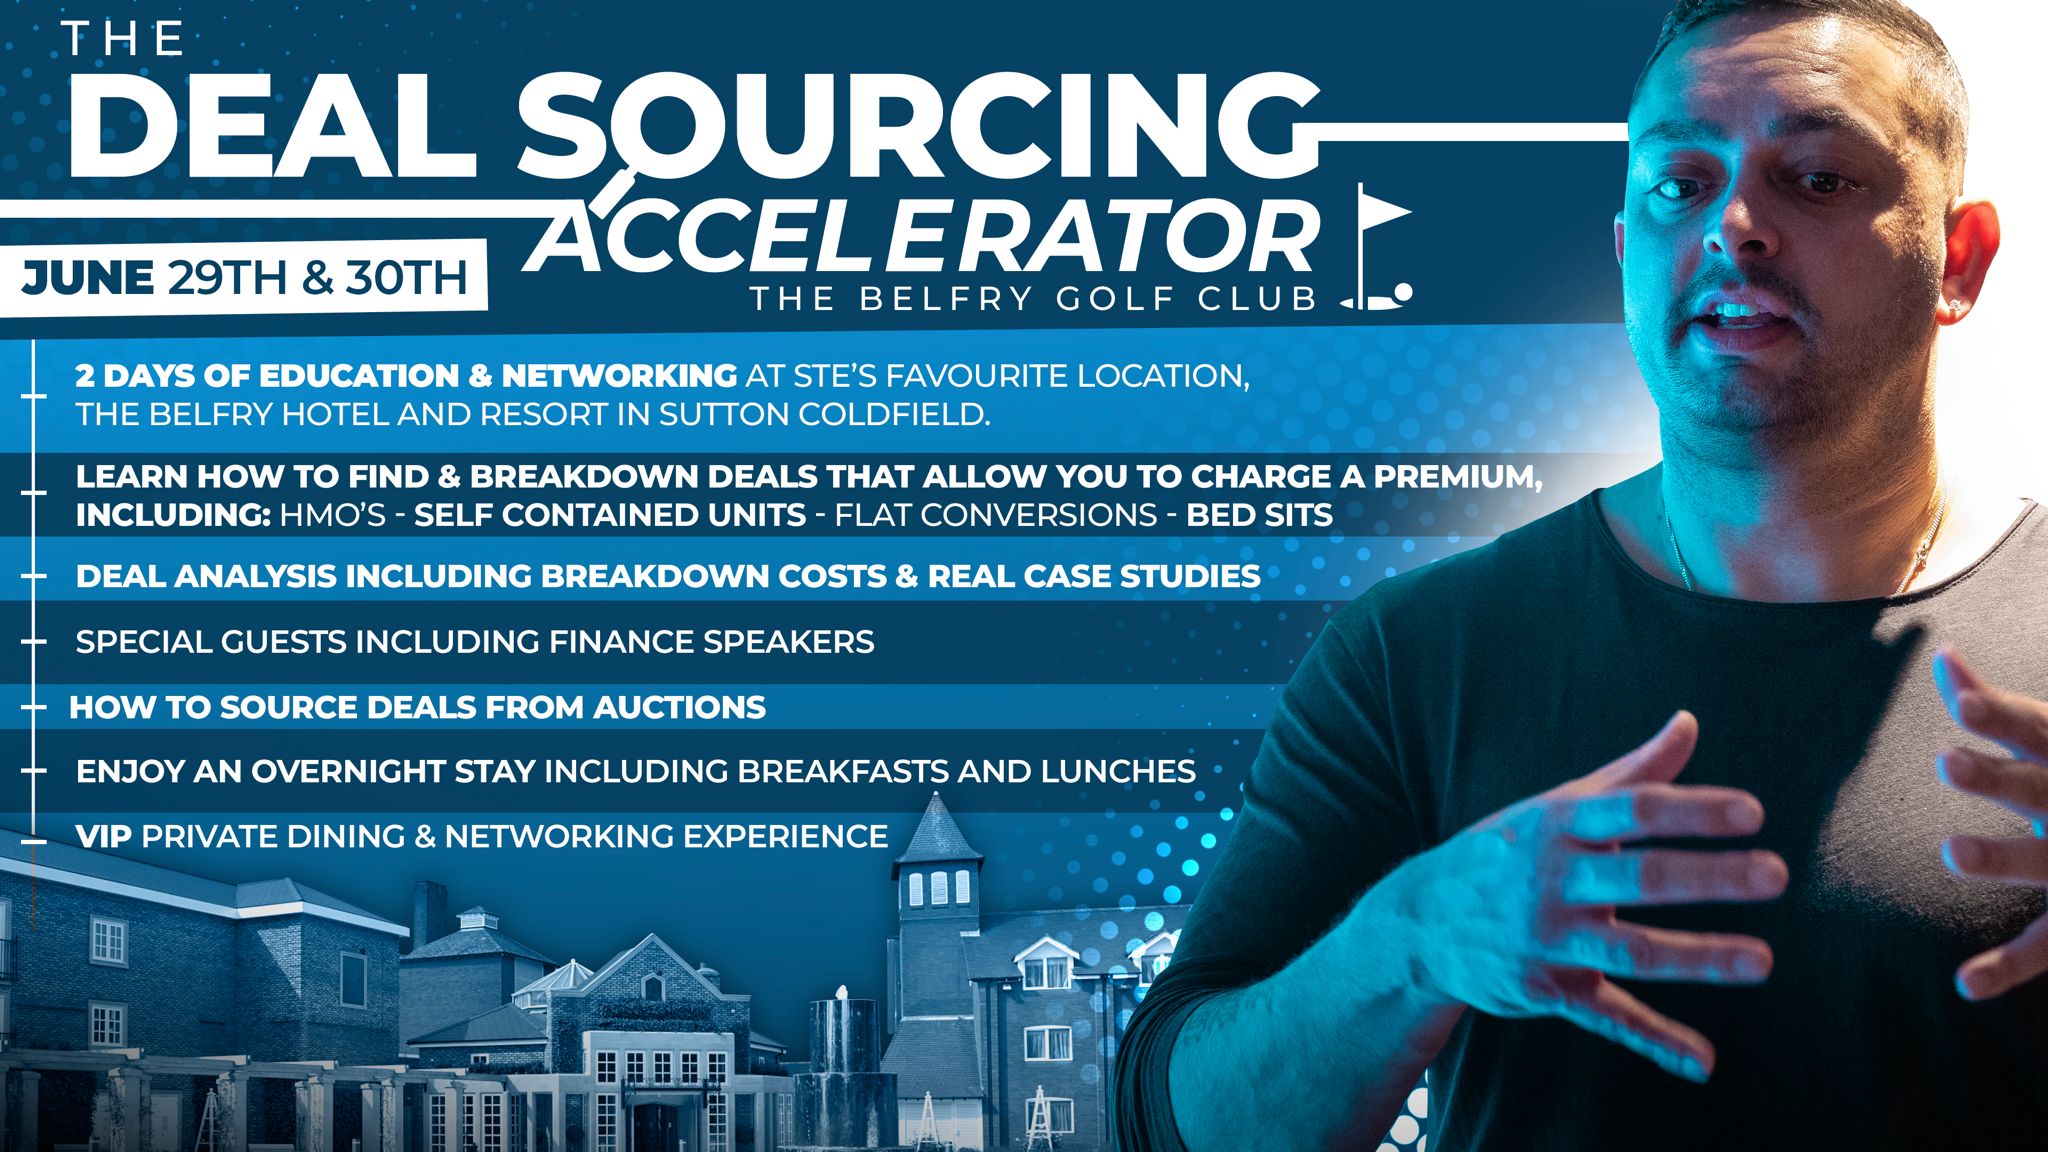 Deal Sourcing Accelerator Event